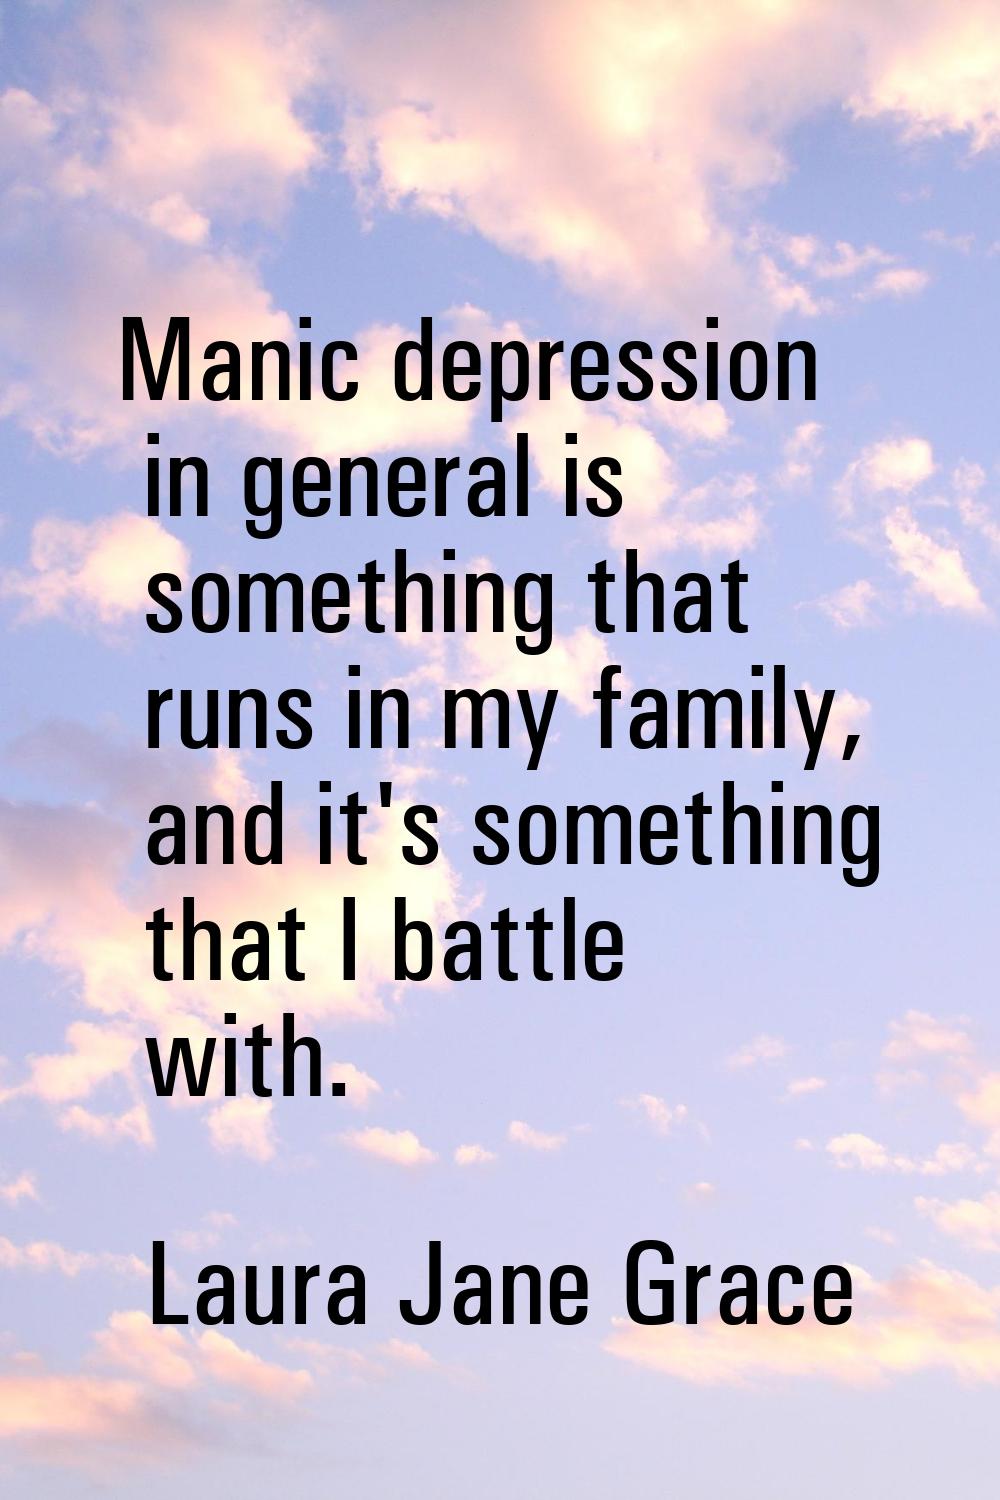 Manic depression in general is something that runs in my family, and it's something that I battle w